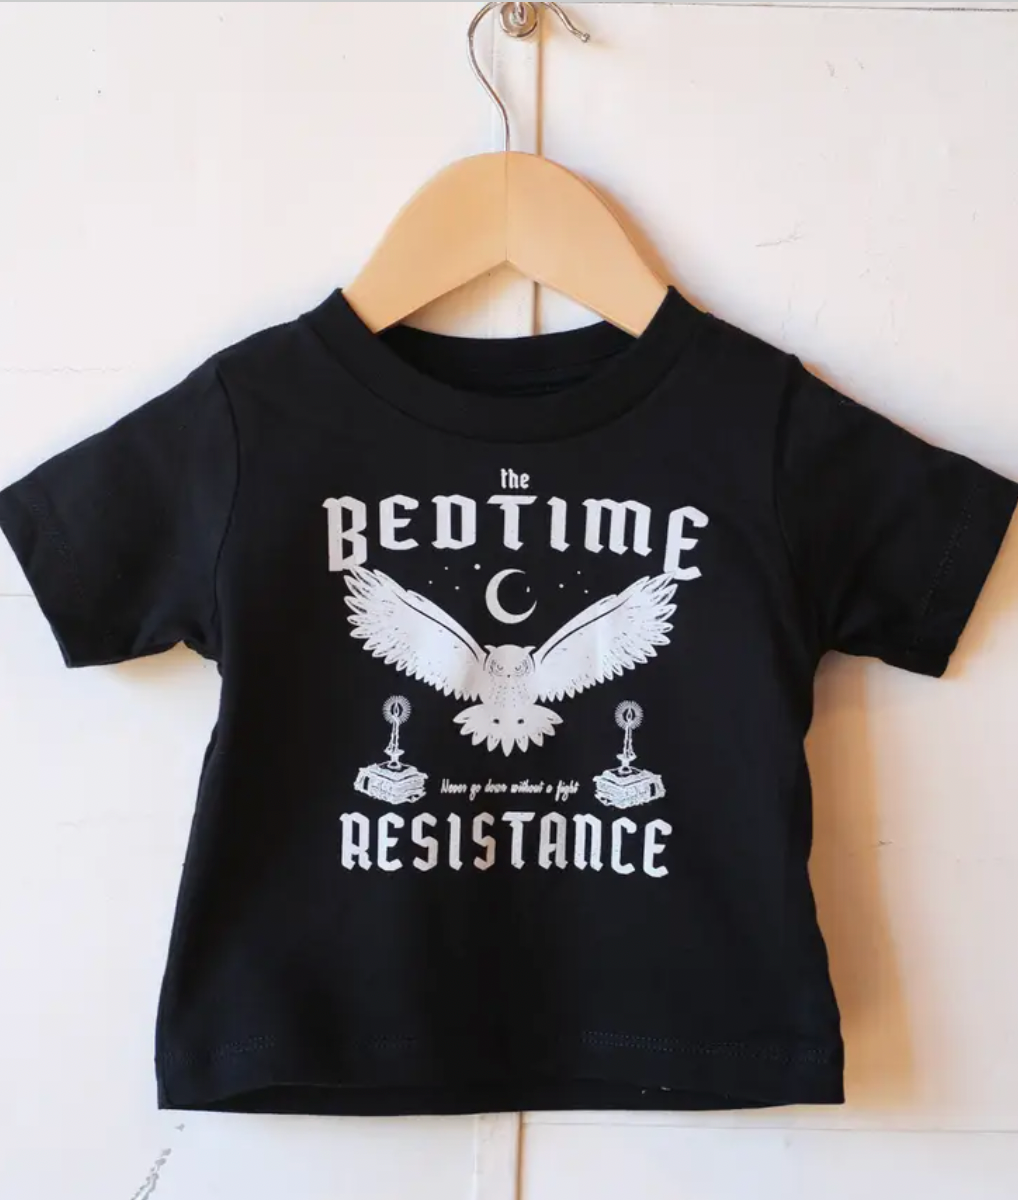 Ambitious Kids - Bedtime Resistance Tee in Black (6-12mo)